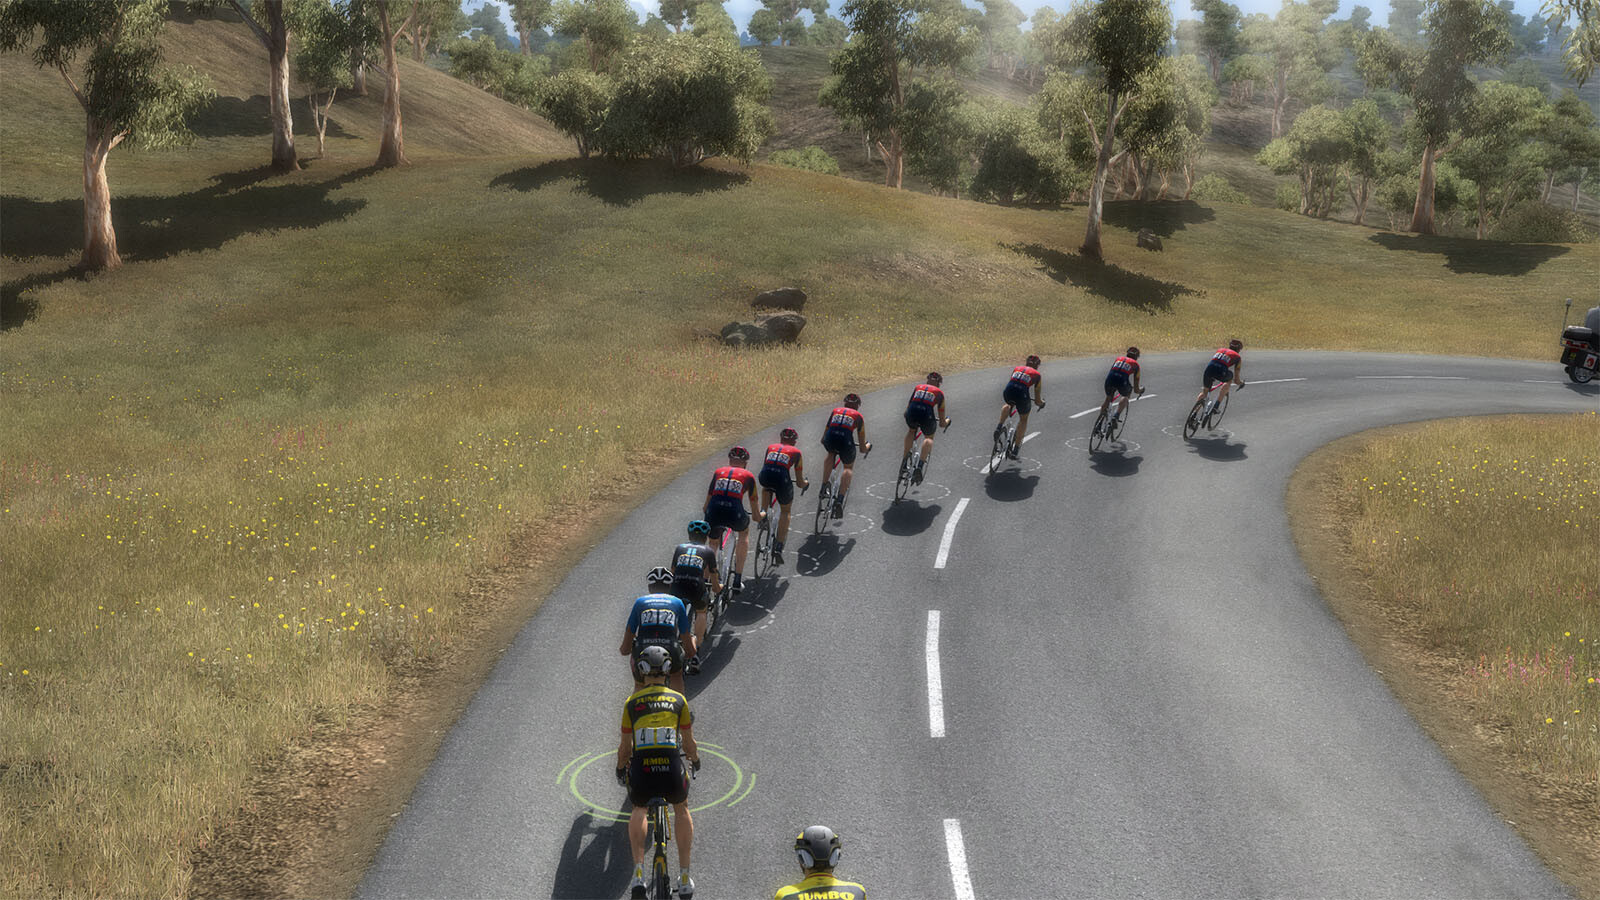 Pro Cycling Manager 2019 Steam Key for PC - Buy now